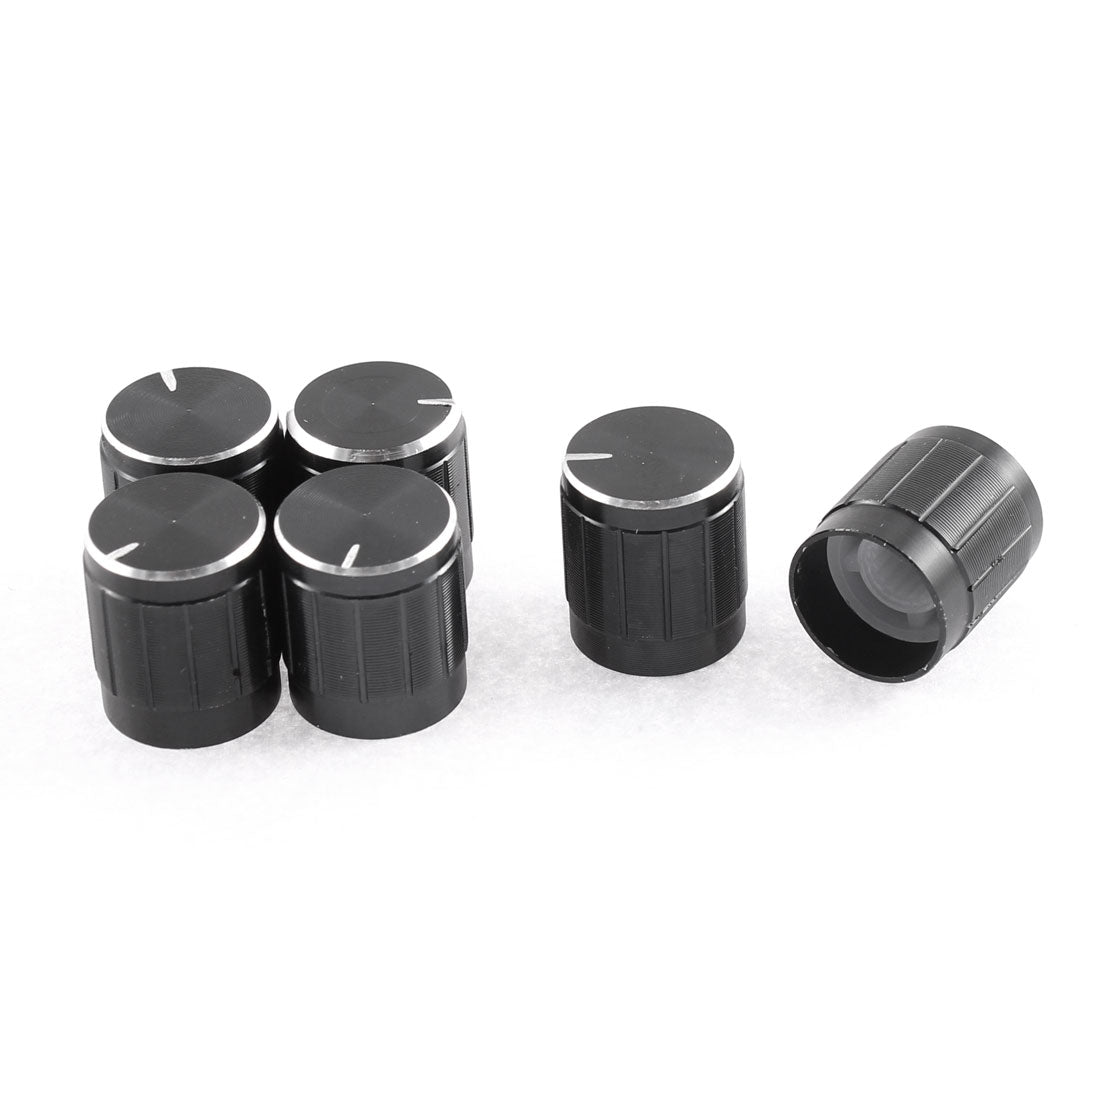 uxcell Uxcell 6mm Shaft Hole Dia Lamp Dimmer Control Rotary Knob Cap Black 15 x 17mm 6Pcs